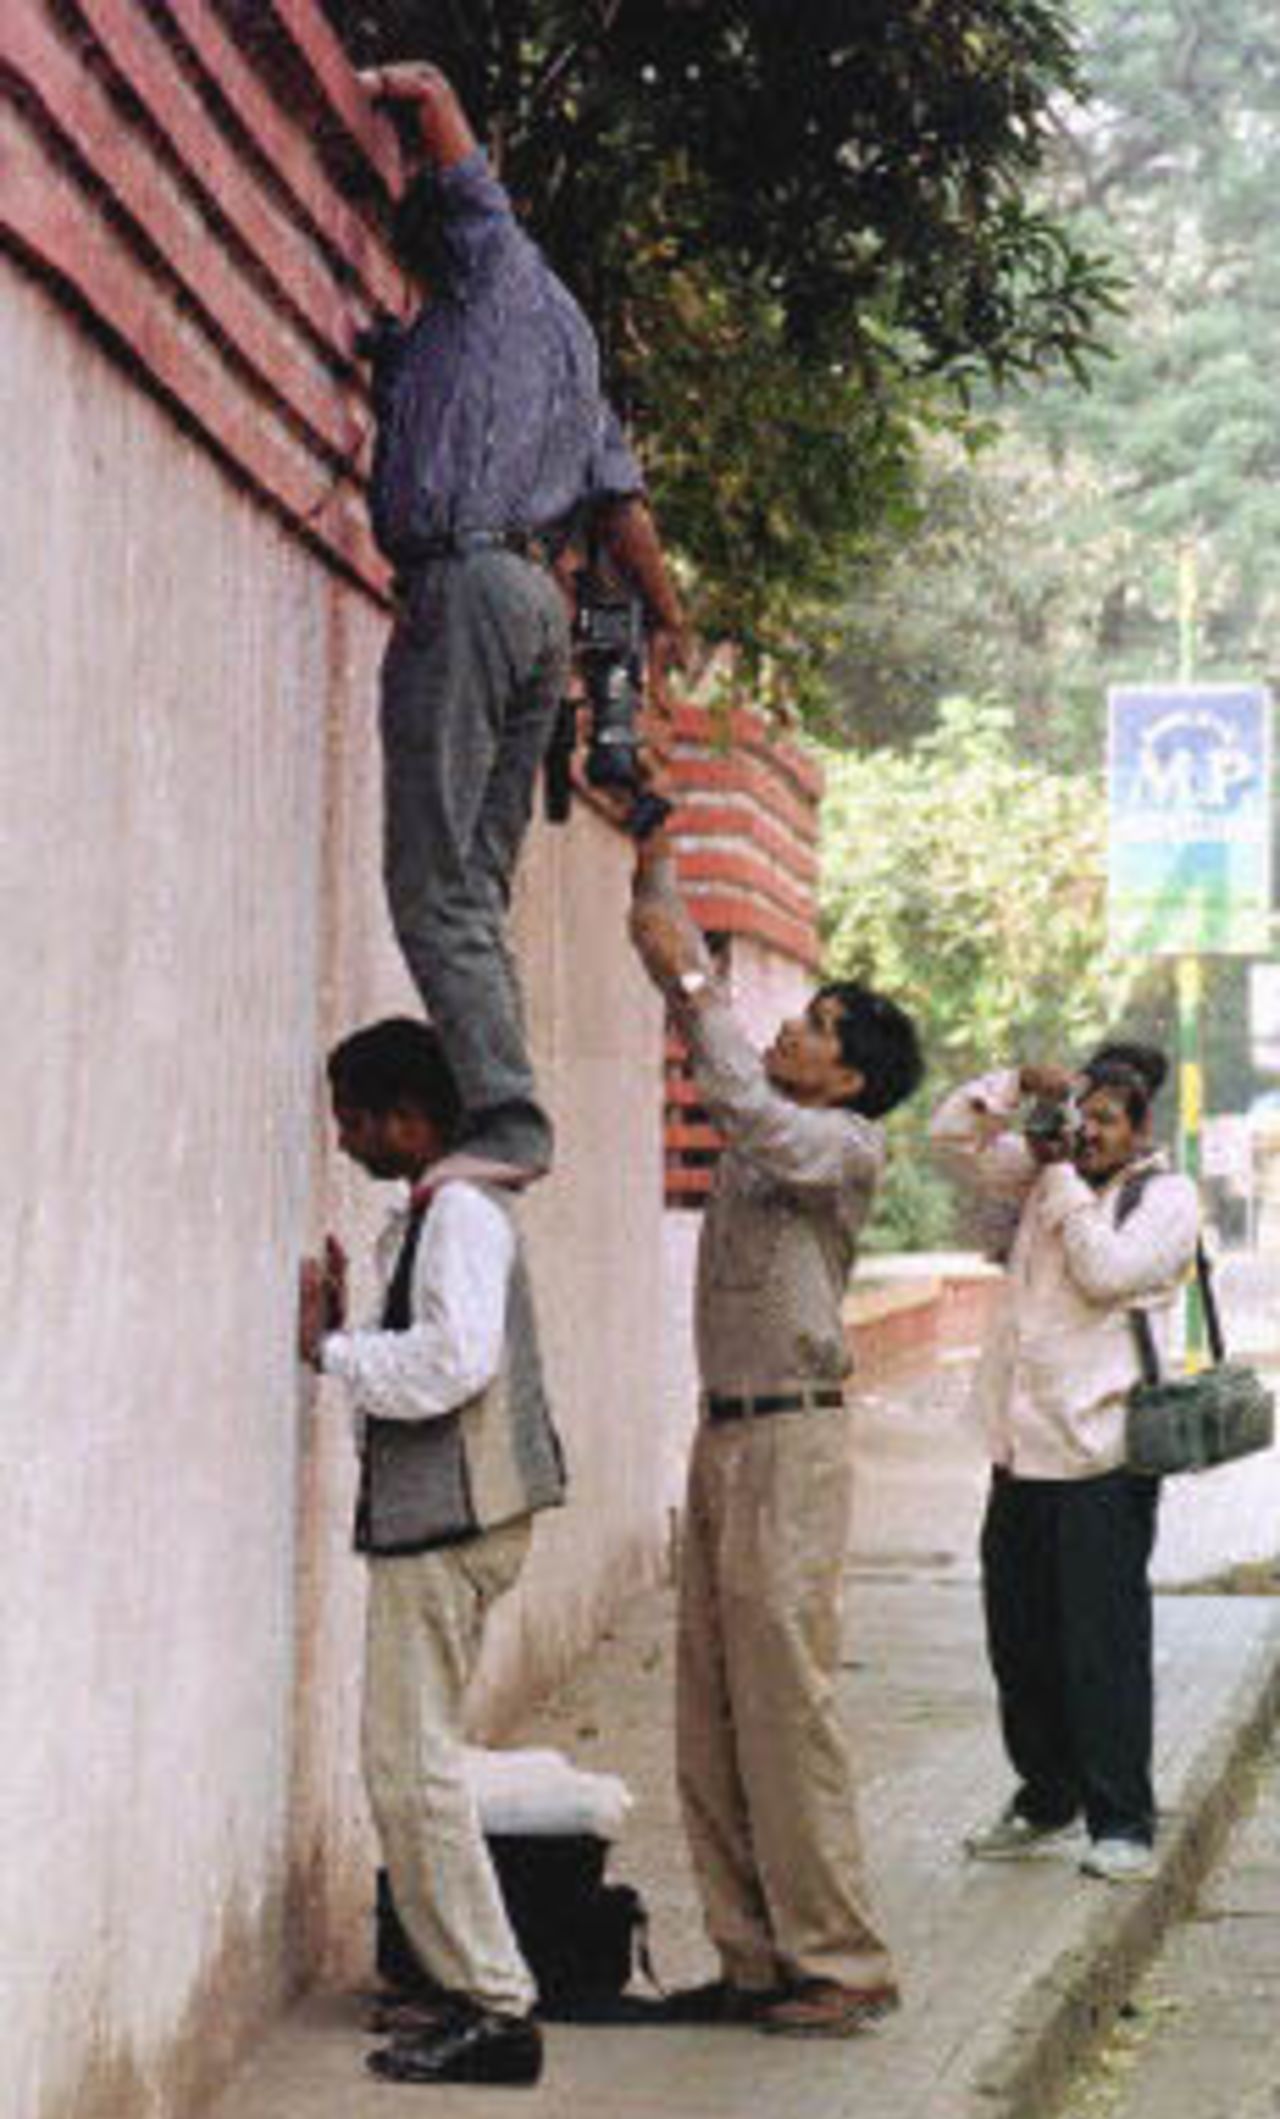 Indian cameramen scale a wall as they try to get some inside shots of the residence of former International Cricket Council (ICC) President Jagamohan Dalmiya in Calcutta, 13 November 2000 after Central Bureau of Investigation (CBI) officers raided his house. The CBI search was in connection with a probe into alleged irregularities in the granting of TV rights to telecast cricket matches.